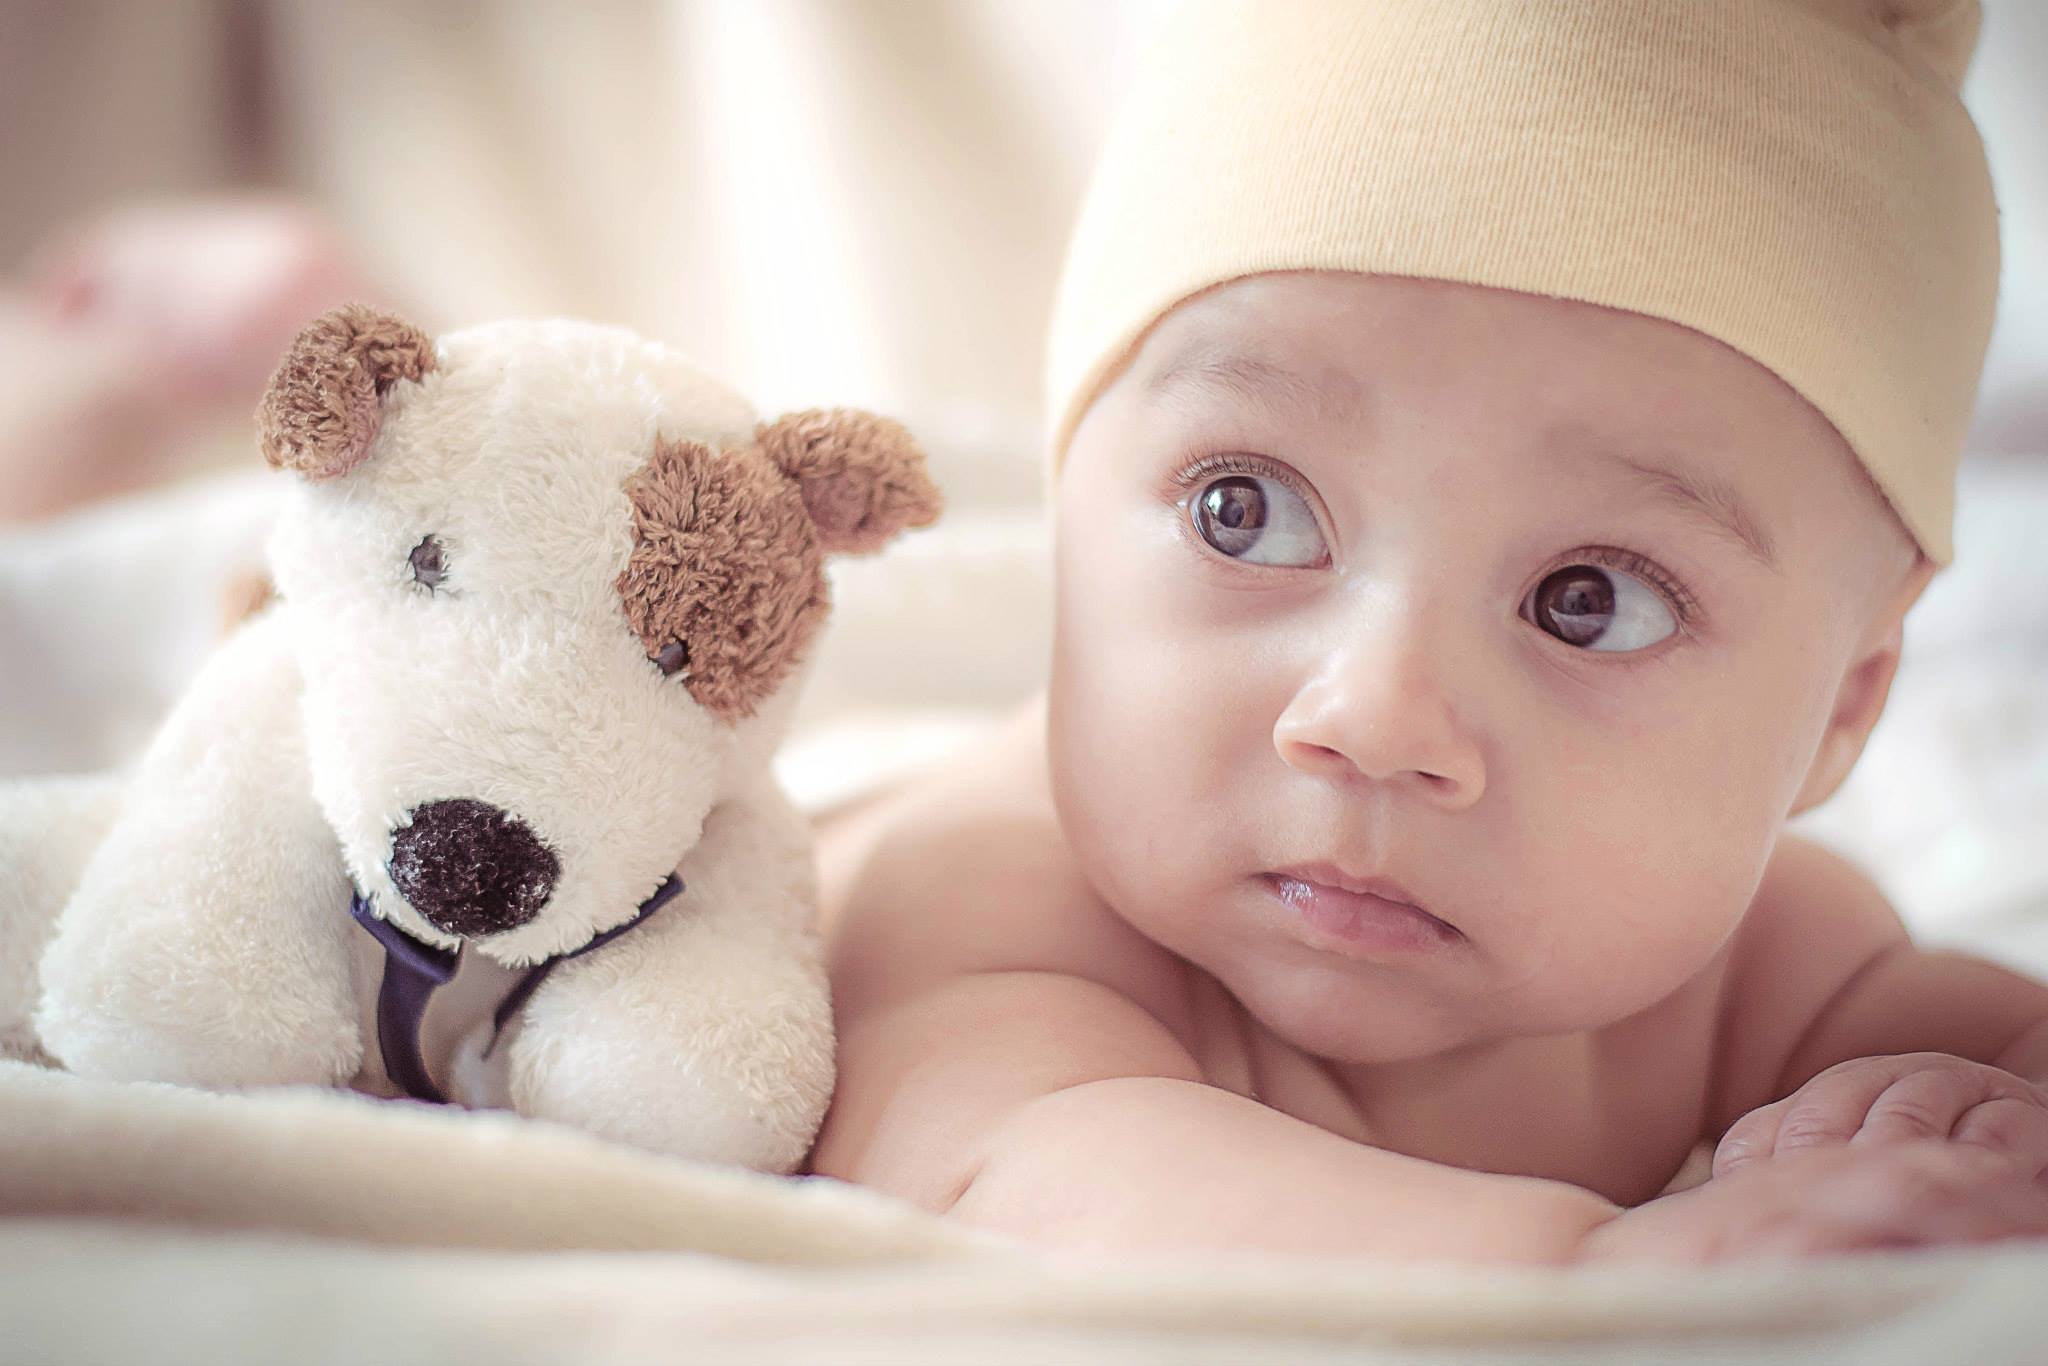 A baby with a toy. | Source: Pexels